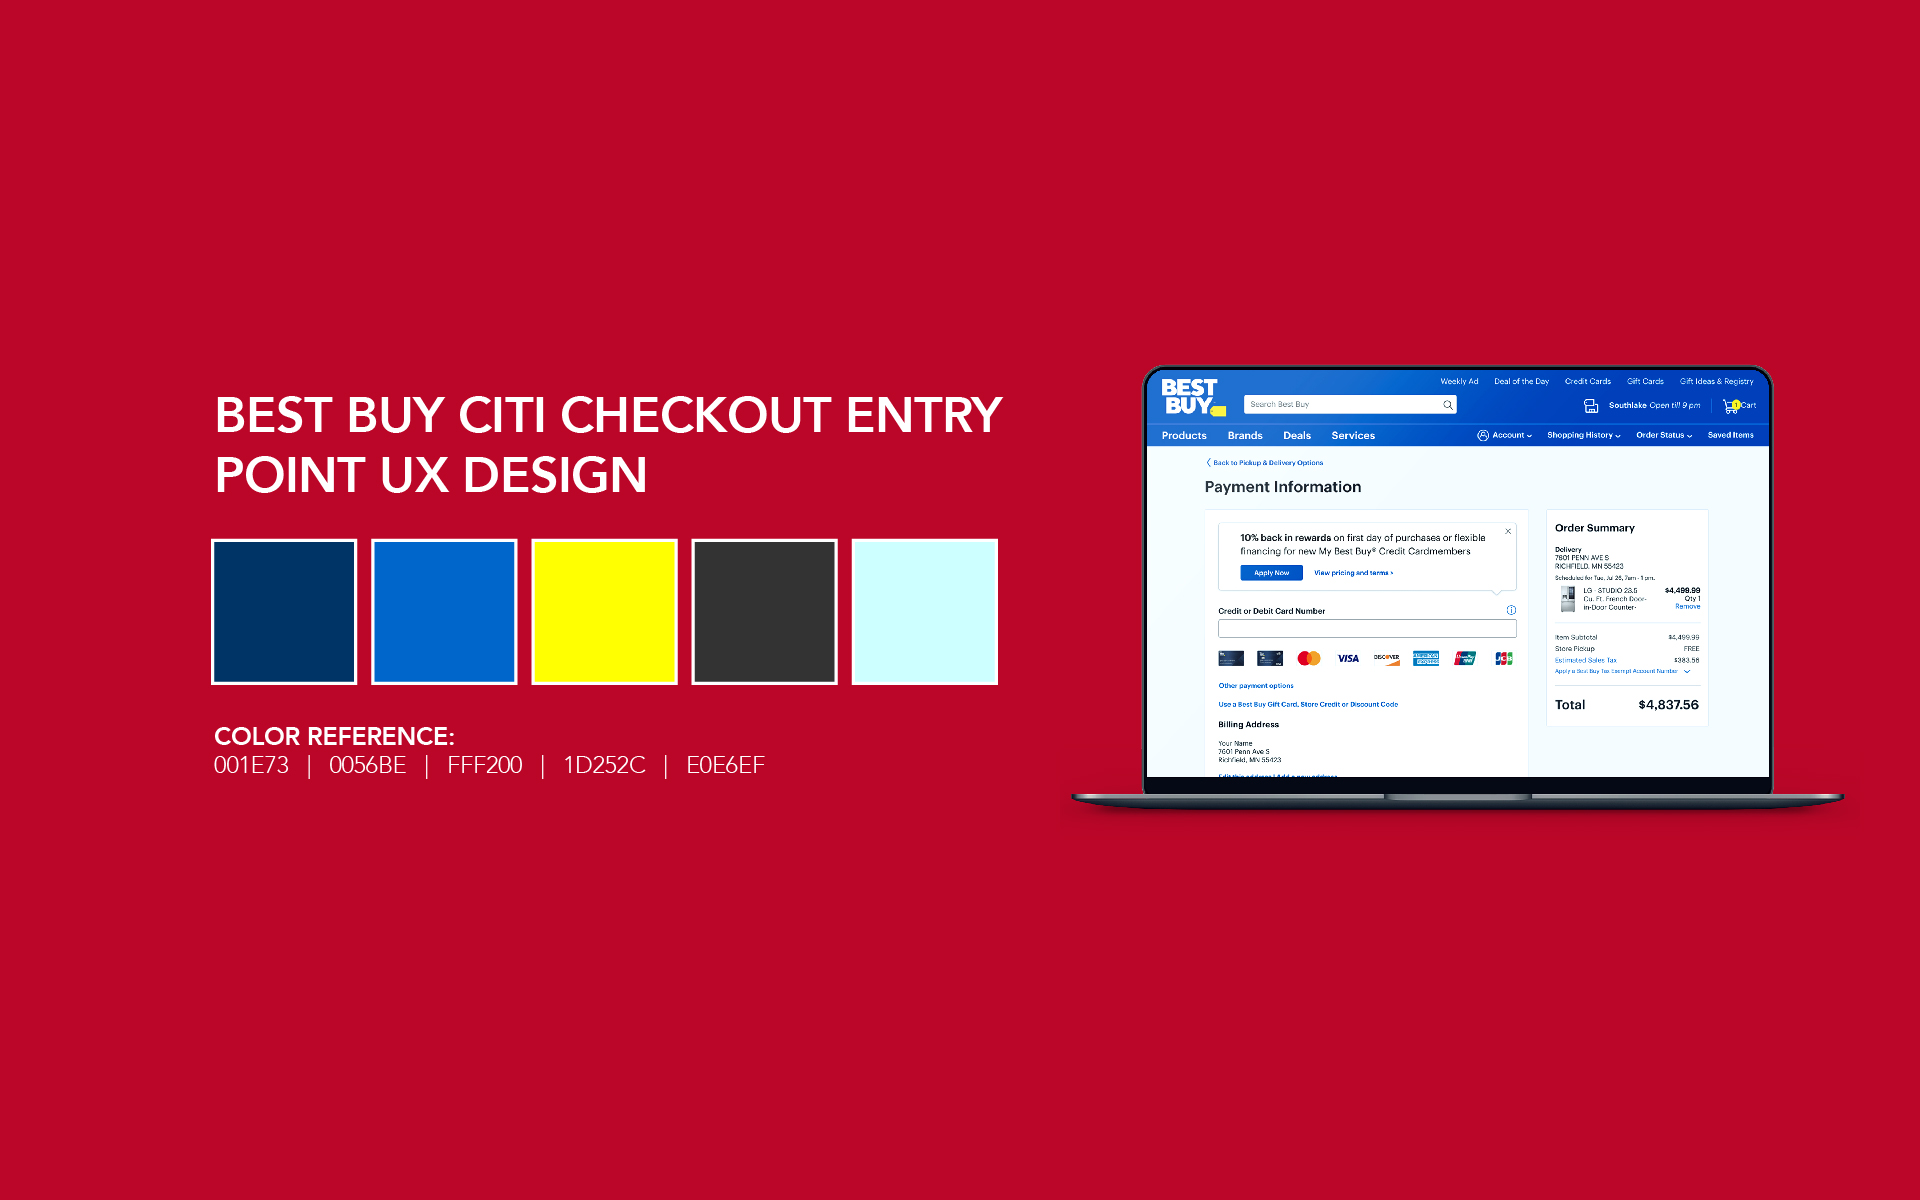 Best Buy Citi Checkout Entry Point